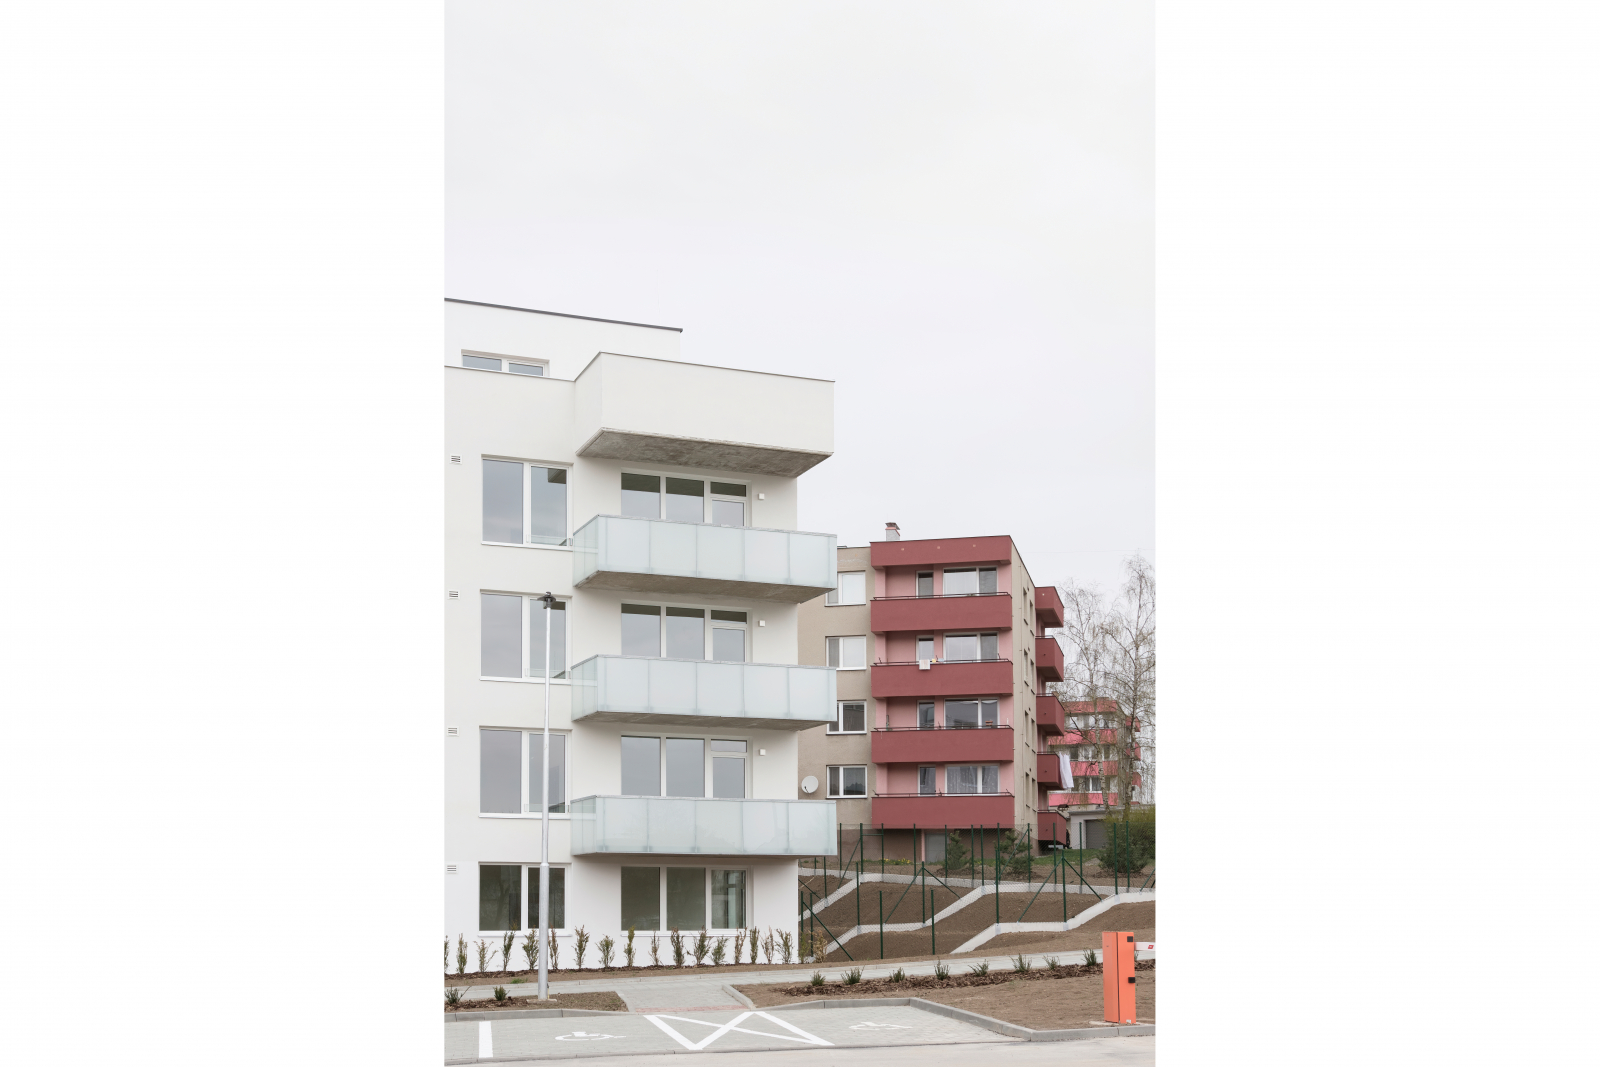 Housing complex Panorama - I. stage | Boskovice